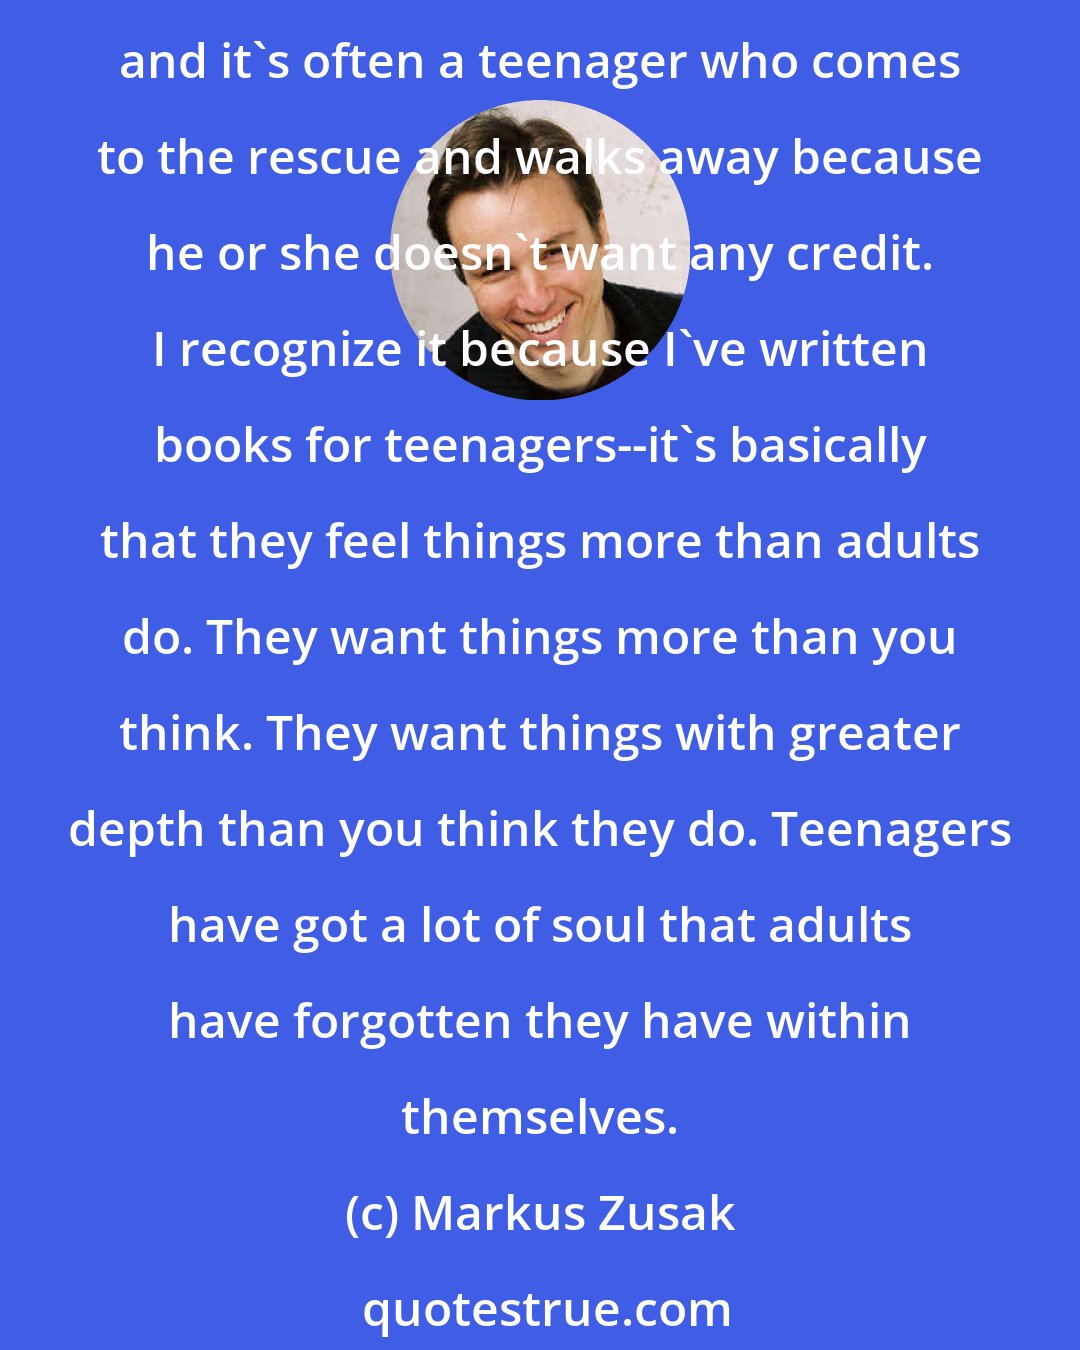 Markus Zusak: We underestimate teenagers at our peril. Even the dismissive thing out on the street--look at what they're wearing. Then we'll hear stories about how a toddler fell on the tracks, and it's often a teenager who comes to the rescue and walks away because he or she doesn't want any credit. I recognize it because I've written books for teenagers--it's basically that they feel things more than adults do. They want things more than you think. They want things with greater depth than you think they do. Teenagers have got a lot of soul that adults have forgotten they have within themselves.